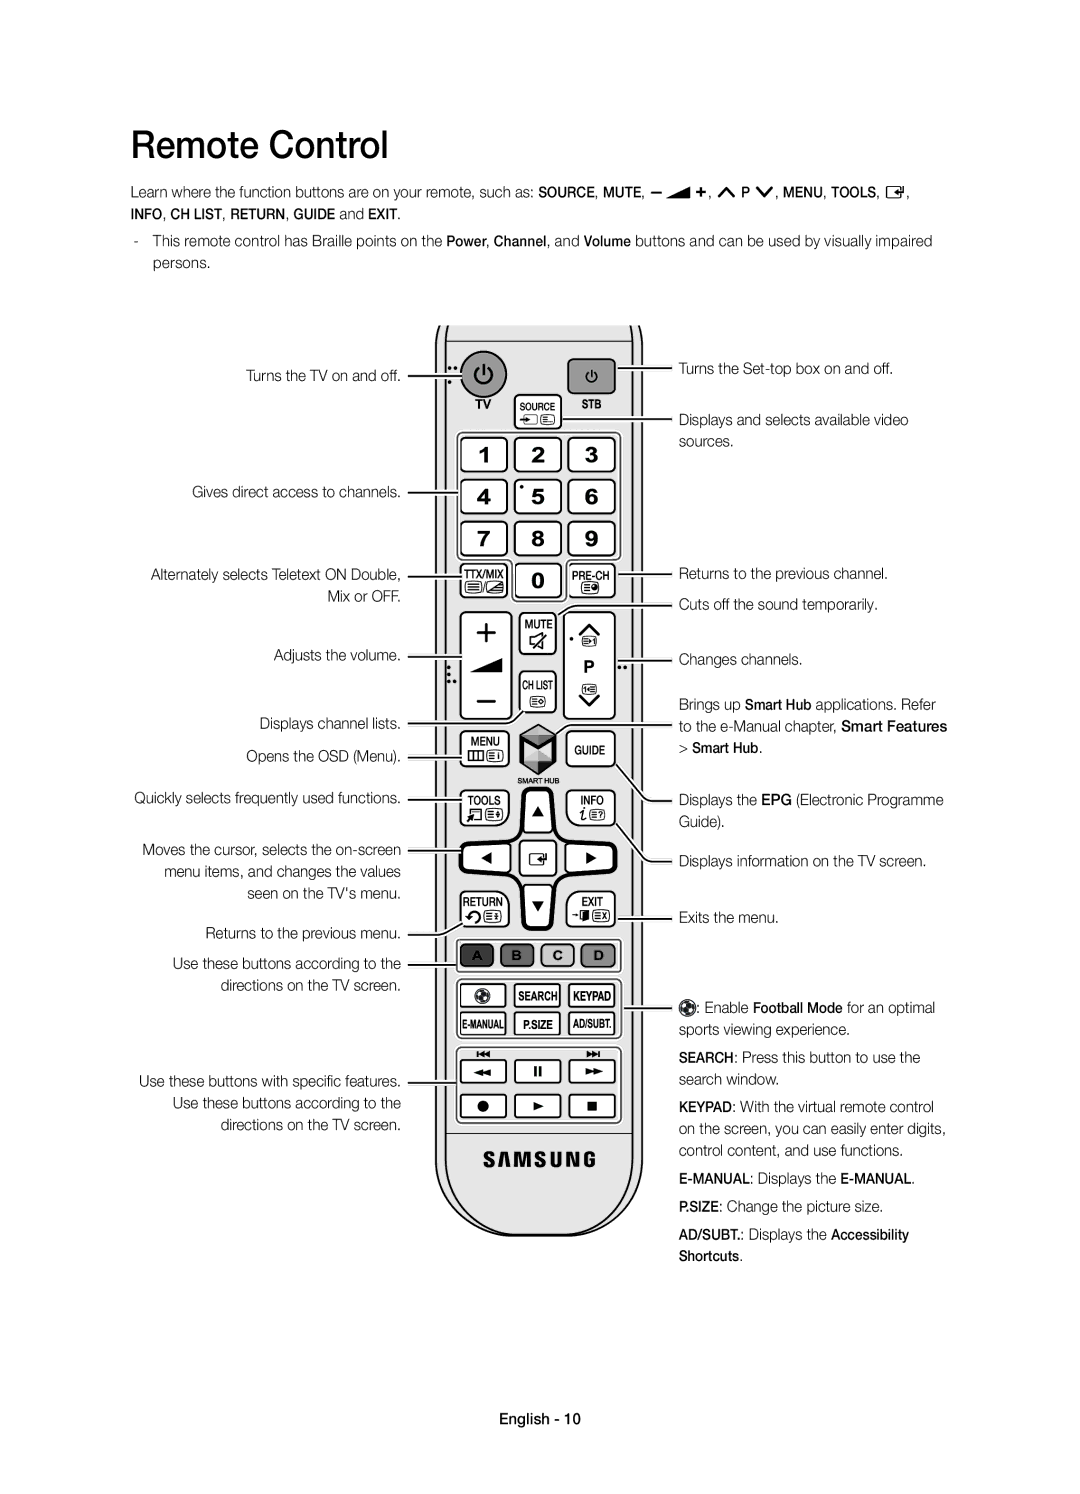 Samsung UE55HU7100SXZG manual Remote Control, Displays channel lists, Opens the OSD Menu, Size Change the picture size 